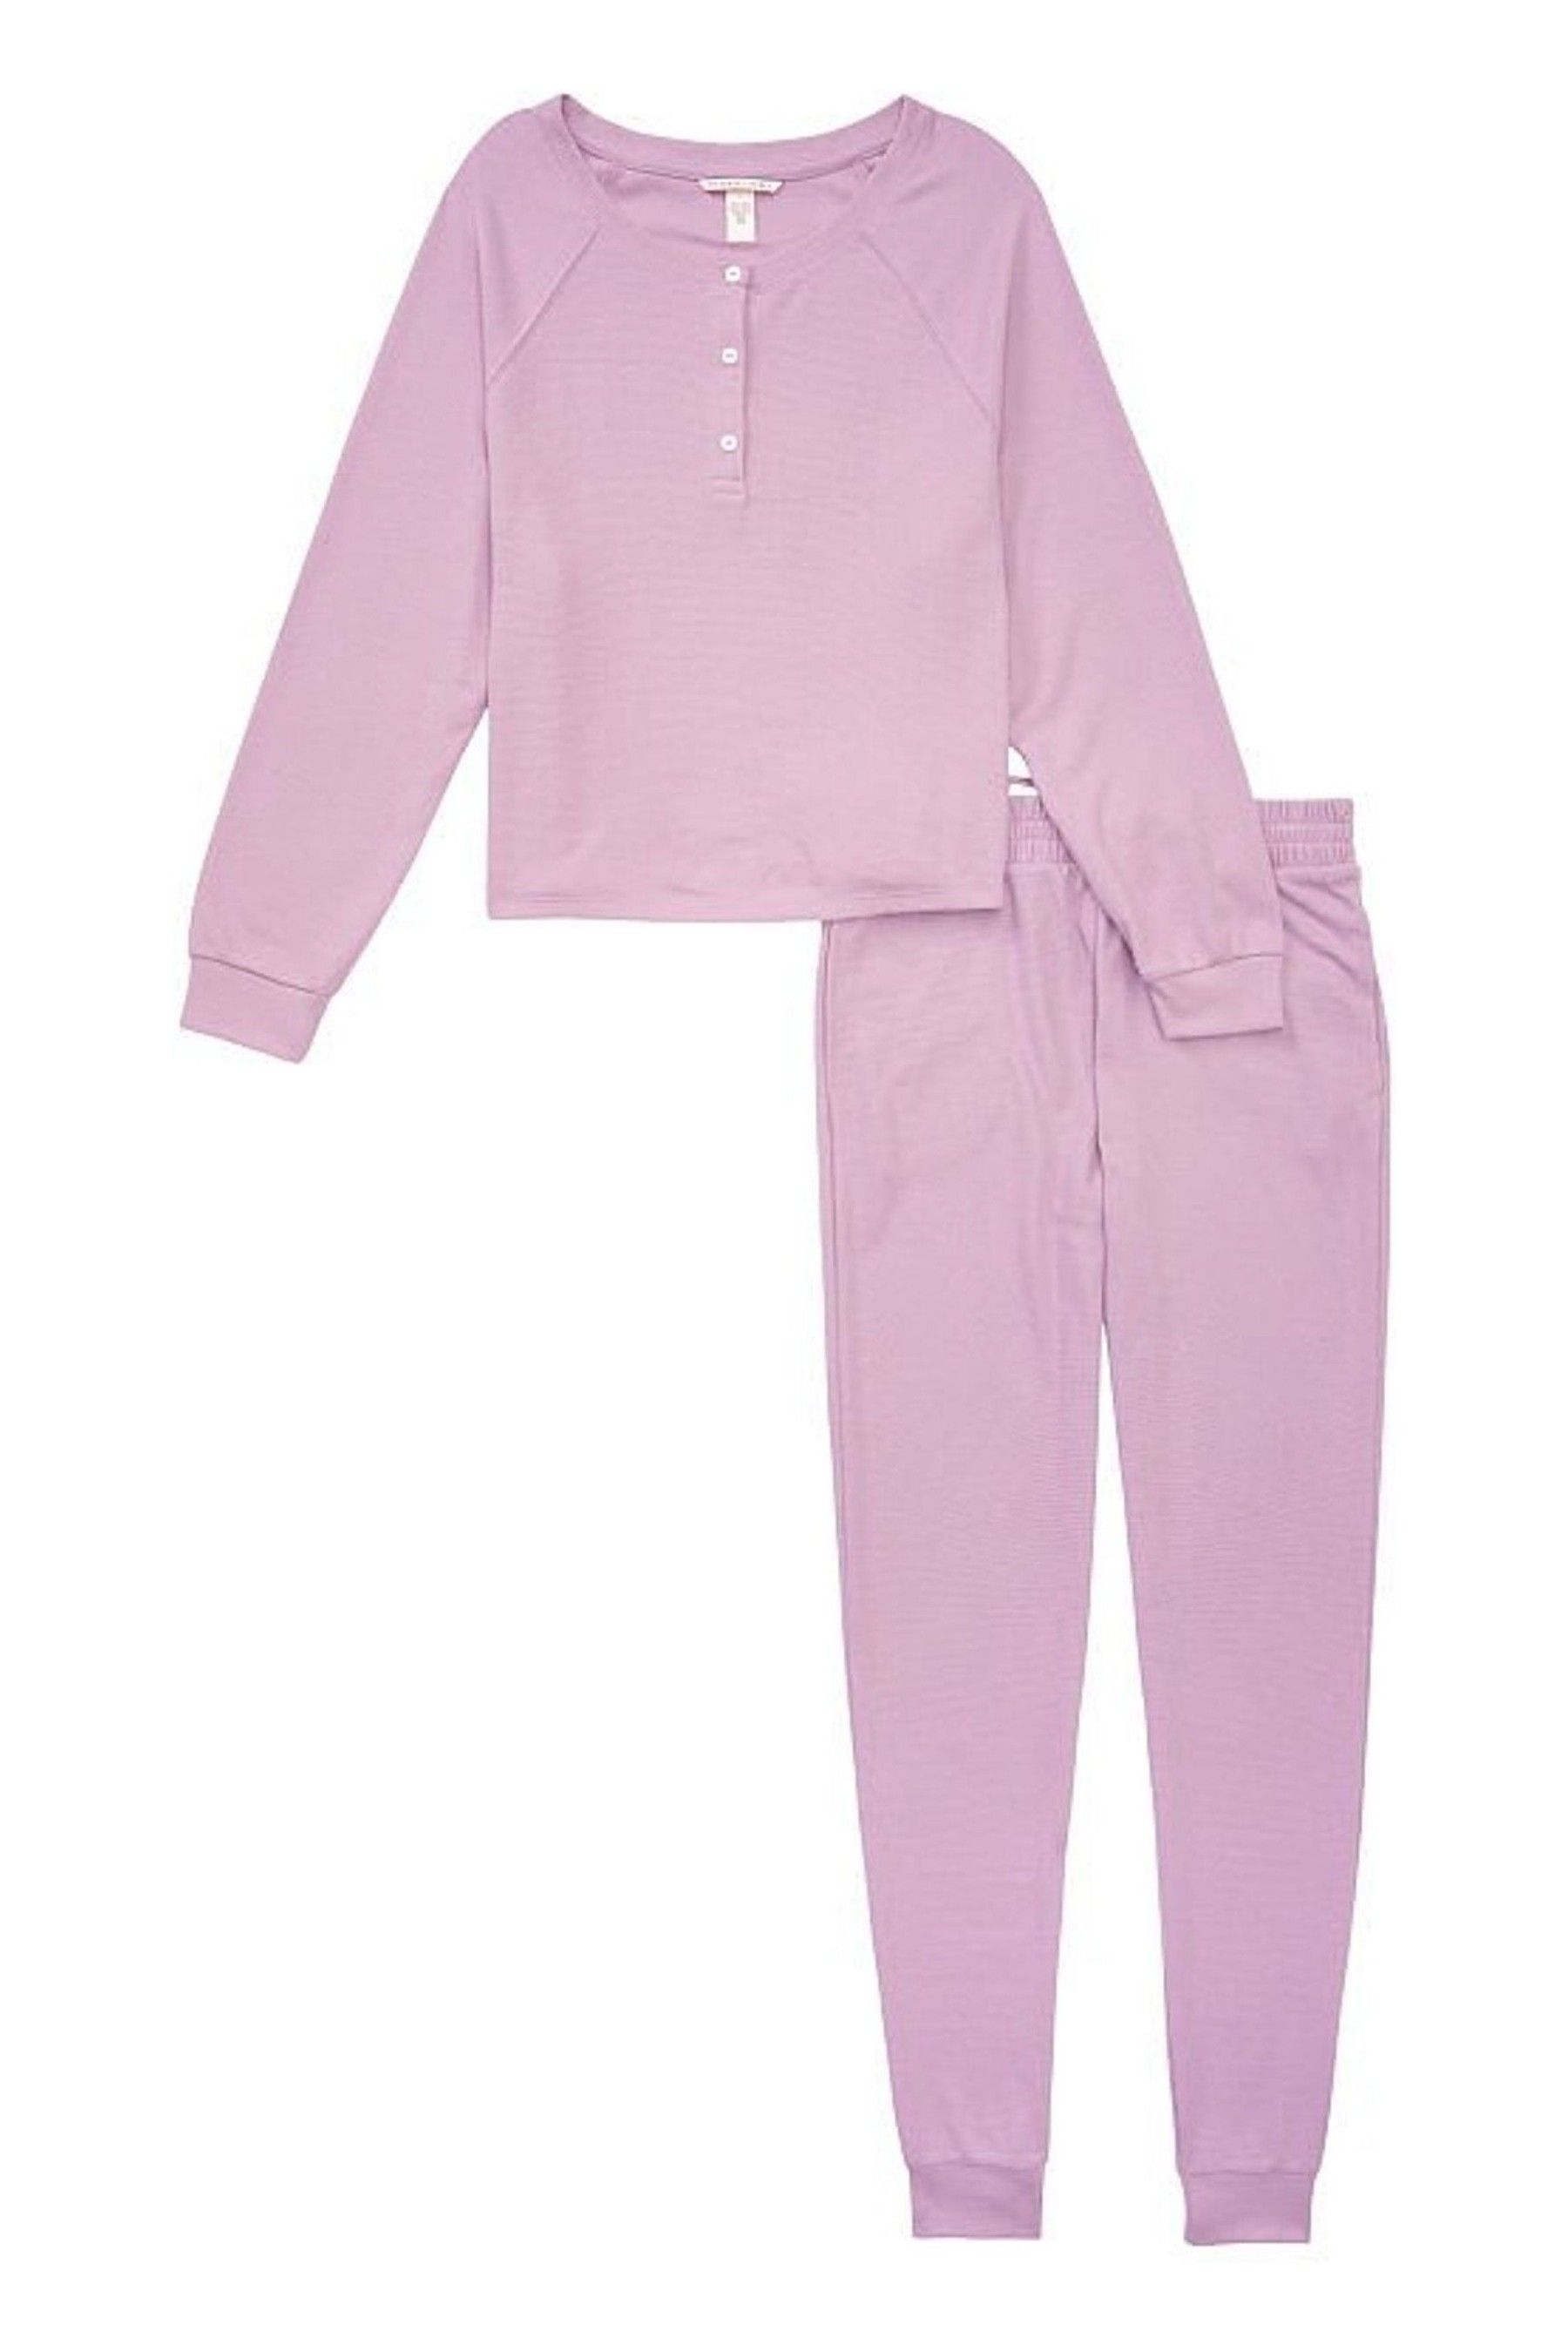 Buy Victoria's Secret Glow Waffle Henley and Jogger Set from the ...